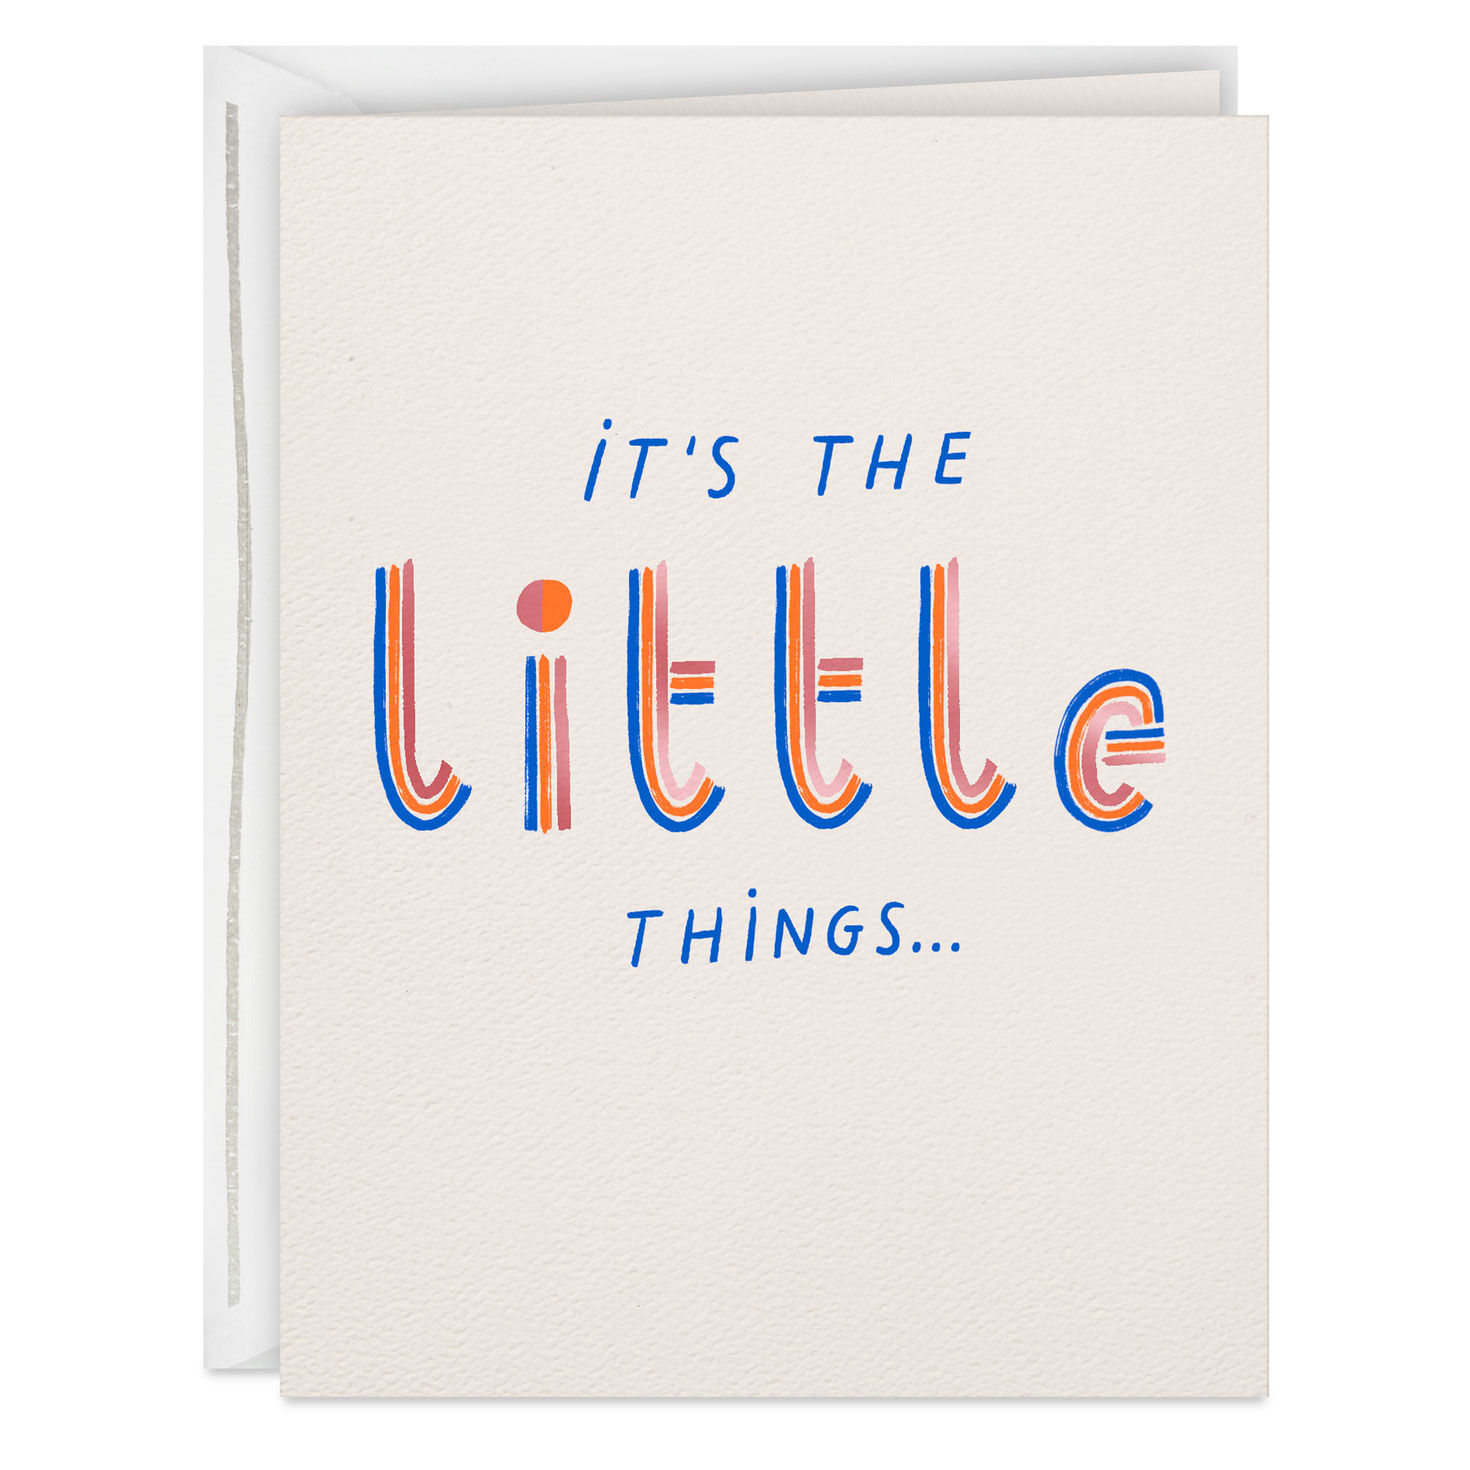 The Little Things Are the Big Things Thank-You Card for only USD 3.99 | Hallmark